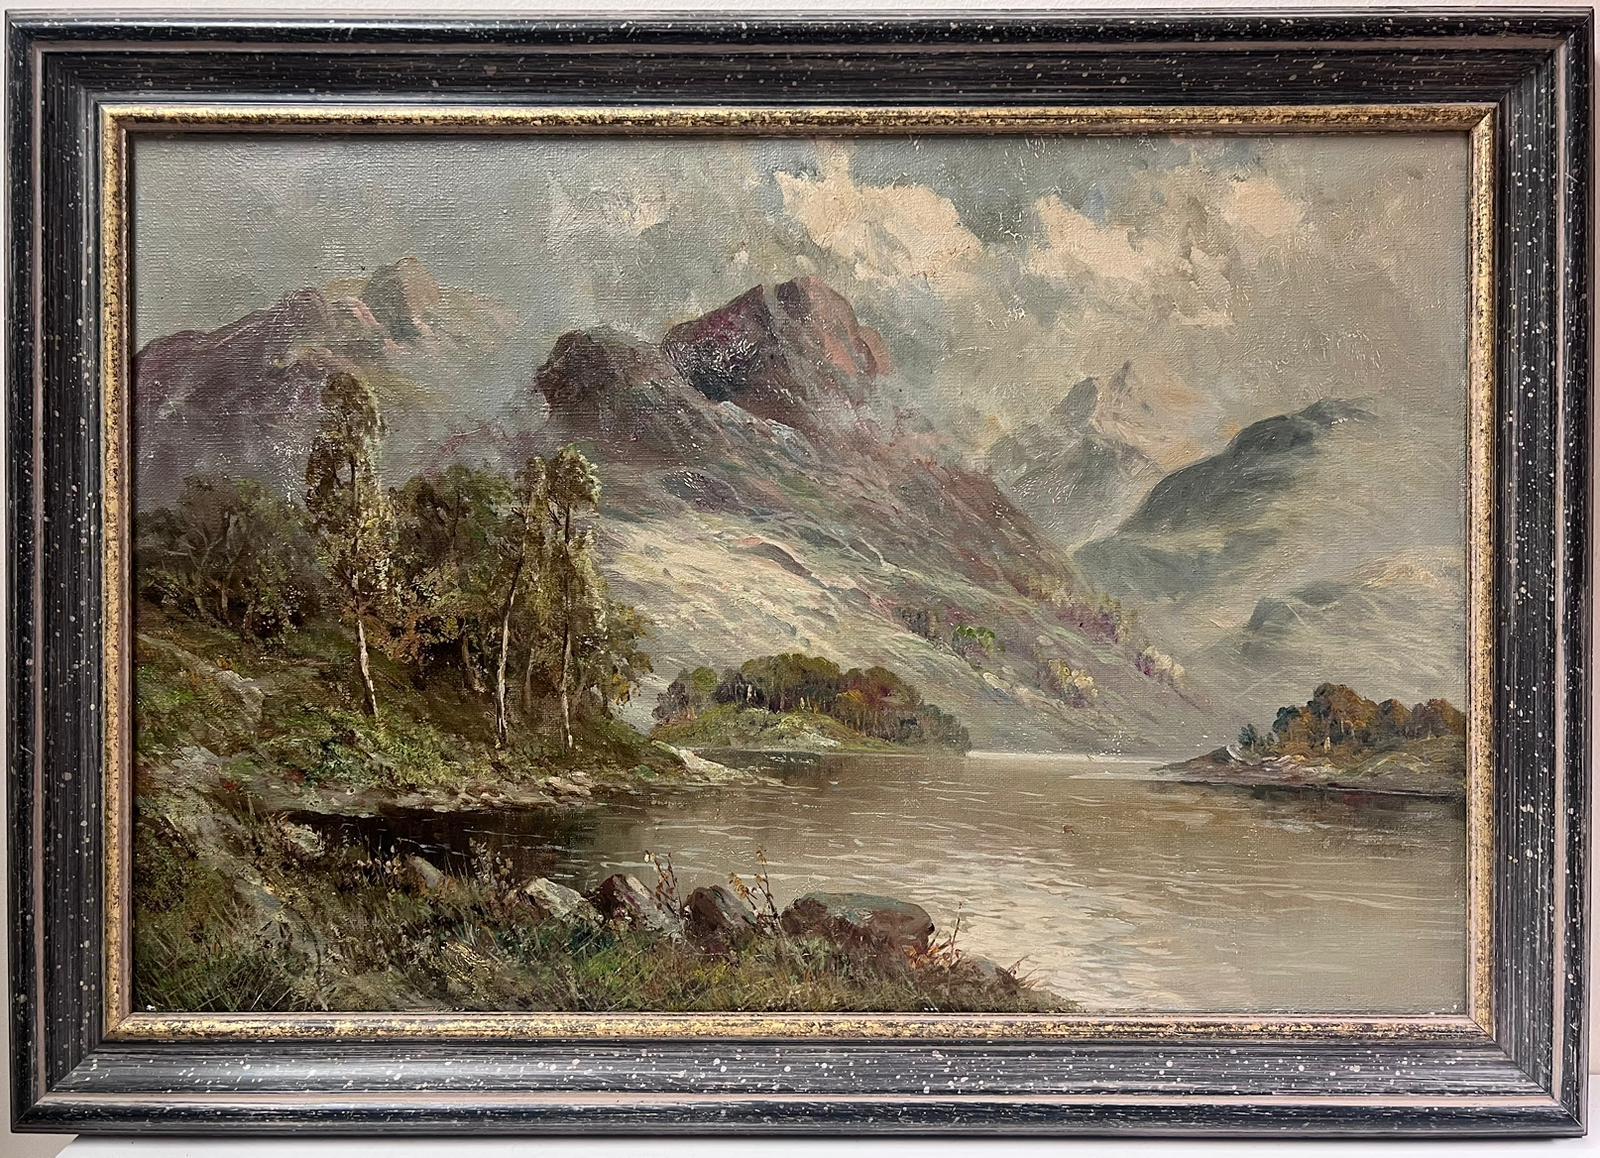 Artist/ School: F. E. Jamieson British, faint signature

Title: The Highland Loch

Medium: Oil on canvas, framed

Size:
framed: 20 x 28 inches
canvas : 16 x 24 inches

Provenance: from a collection in England. 

Condition: The painting is in overall